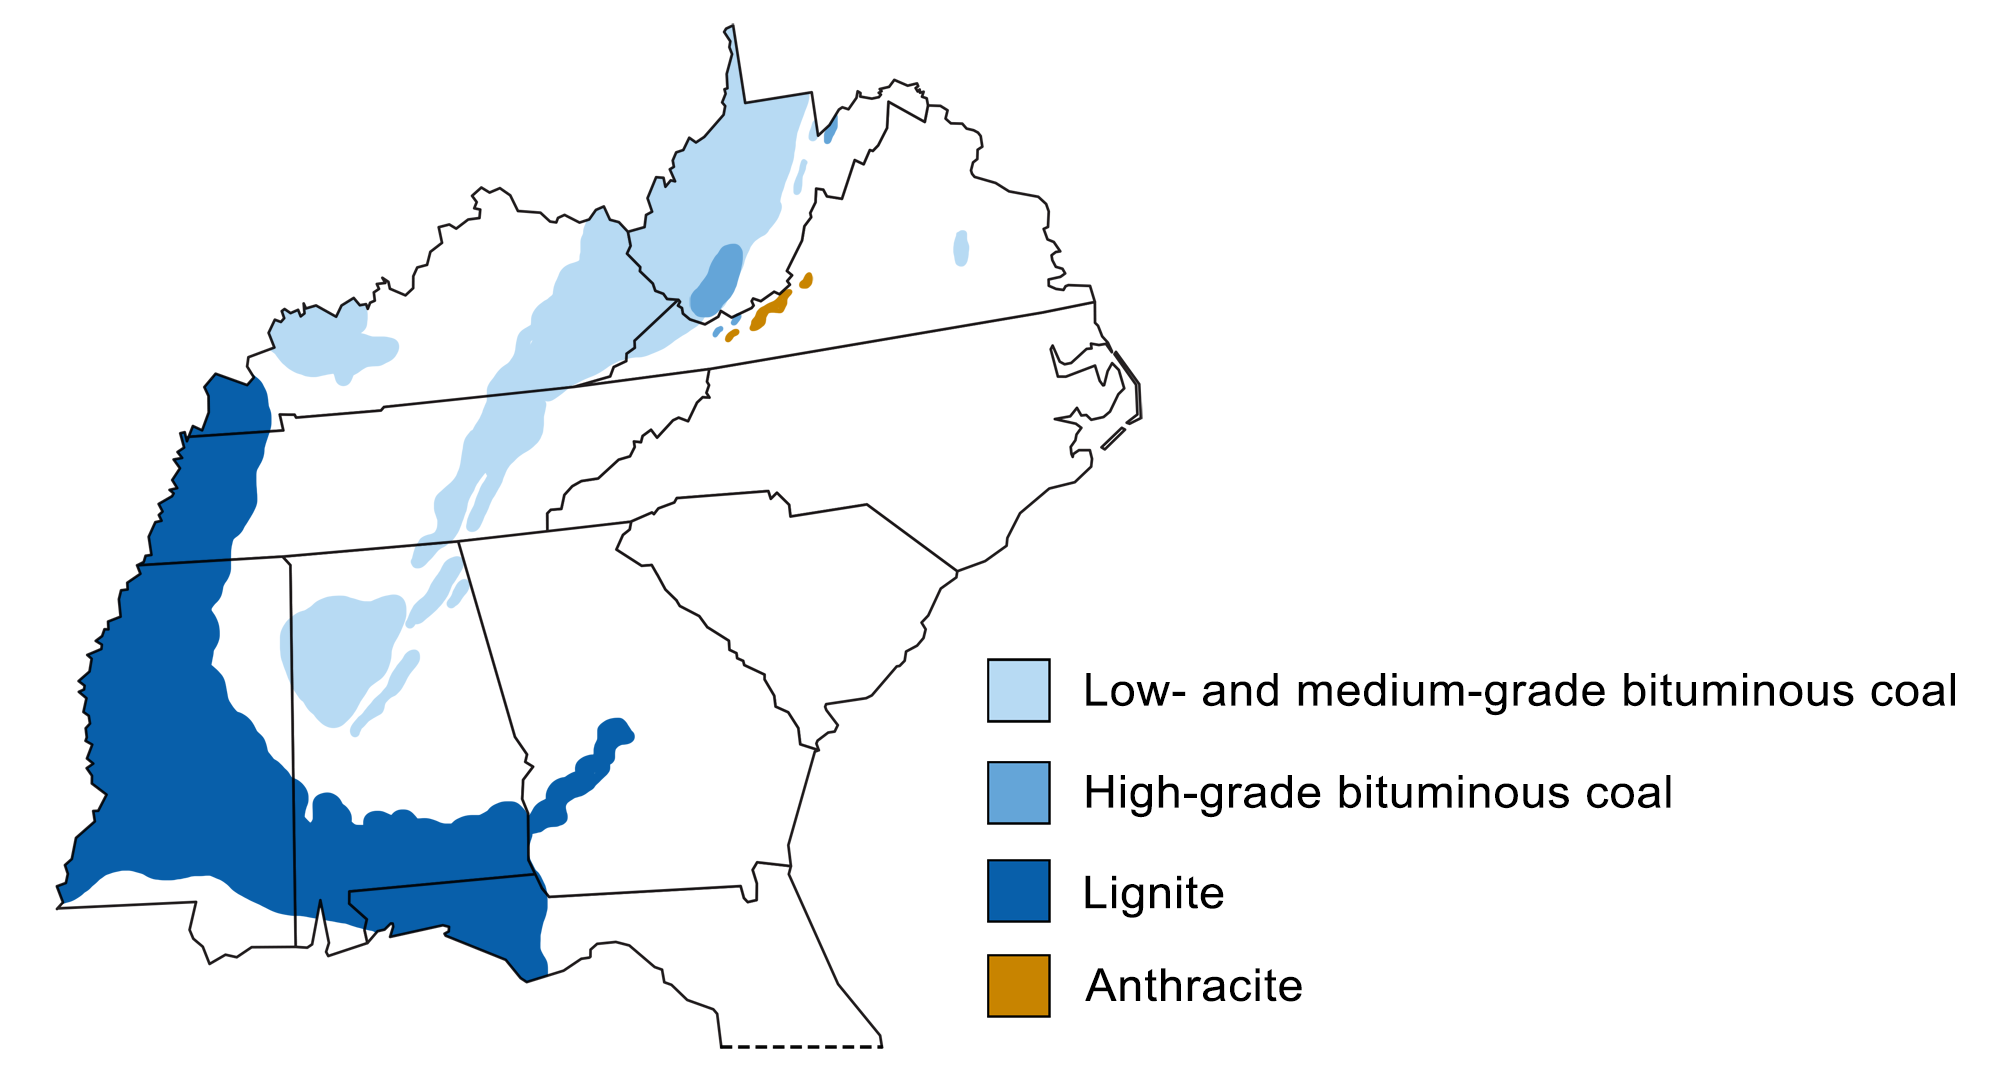 Map of the southeastern United States showing the distribution of lignite, bituminous, and anthracite coals.